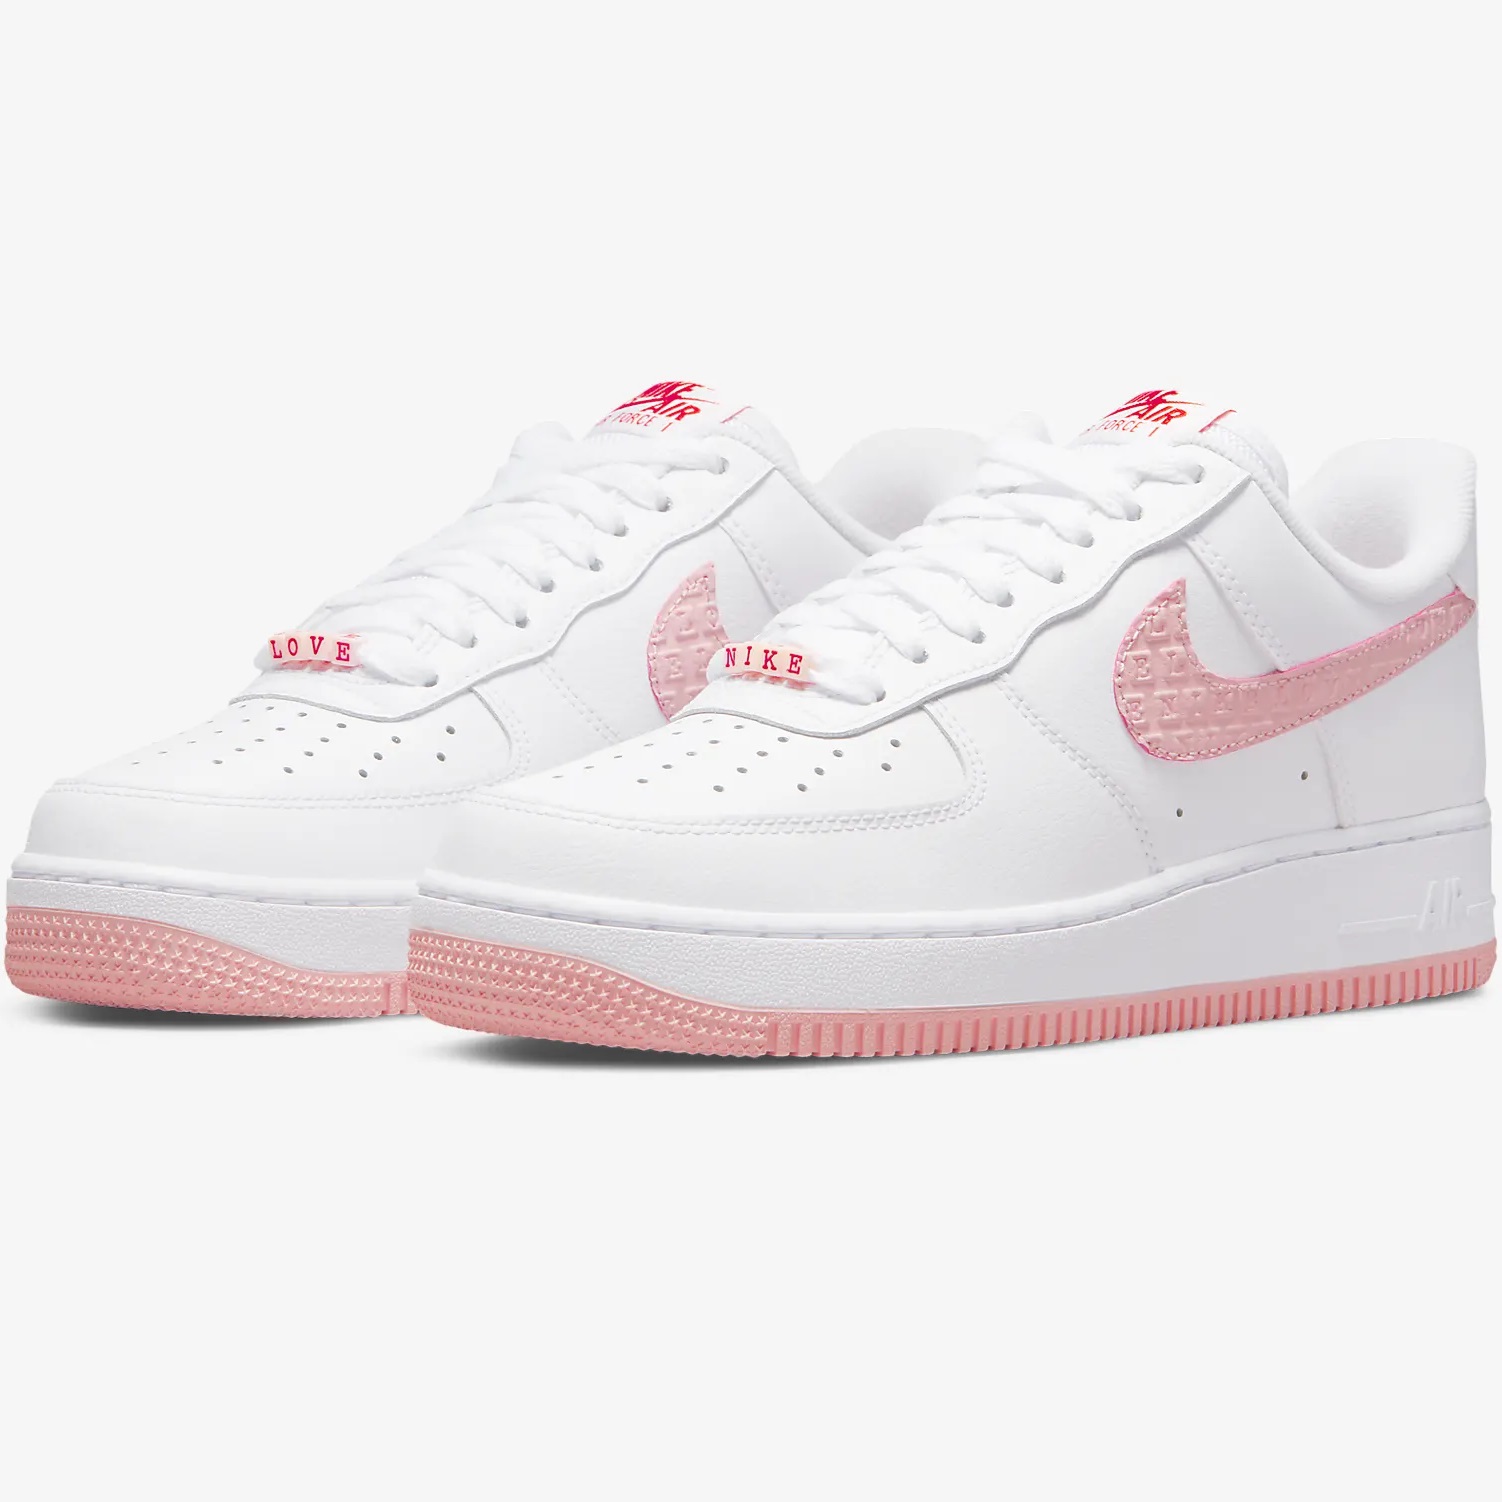 GIÀY NỮ NIKE AIR FORCE 1 07 LOW VD VALENTINE S DAY WHITE ATMOSPHERE UNIVERSITY RED SAIL DQ9320-100 4